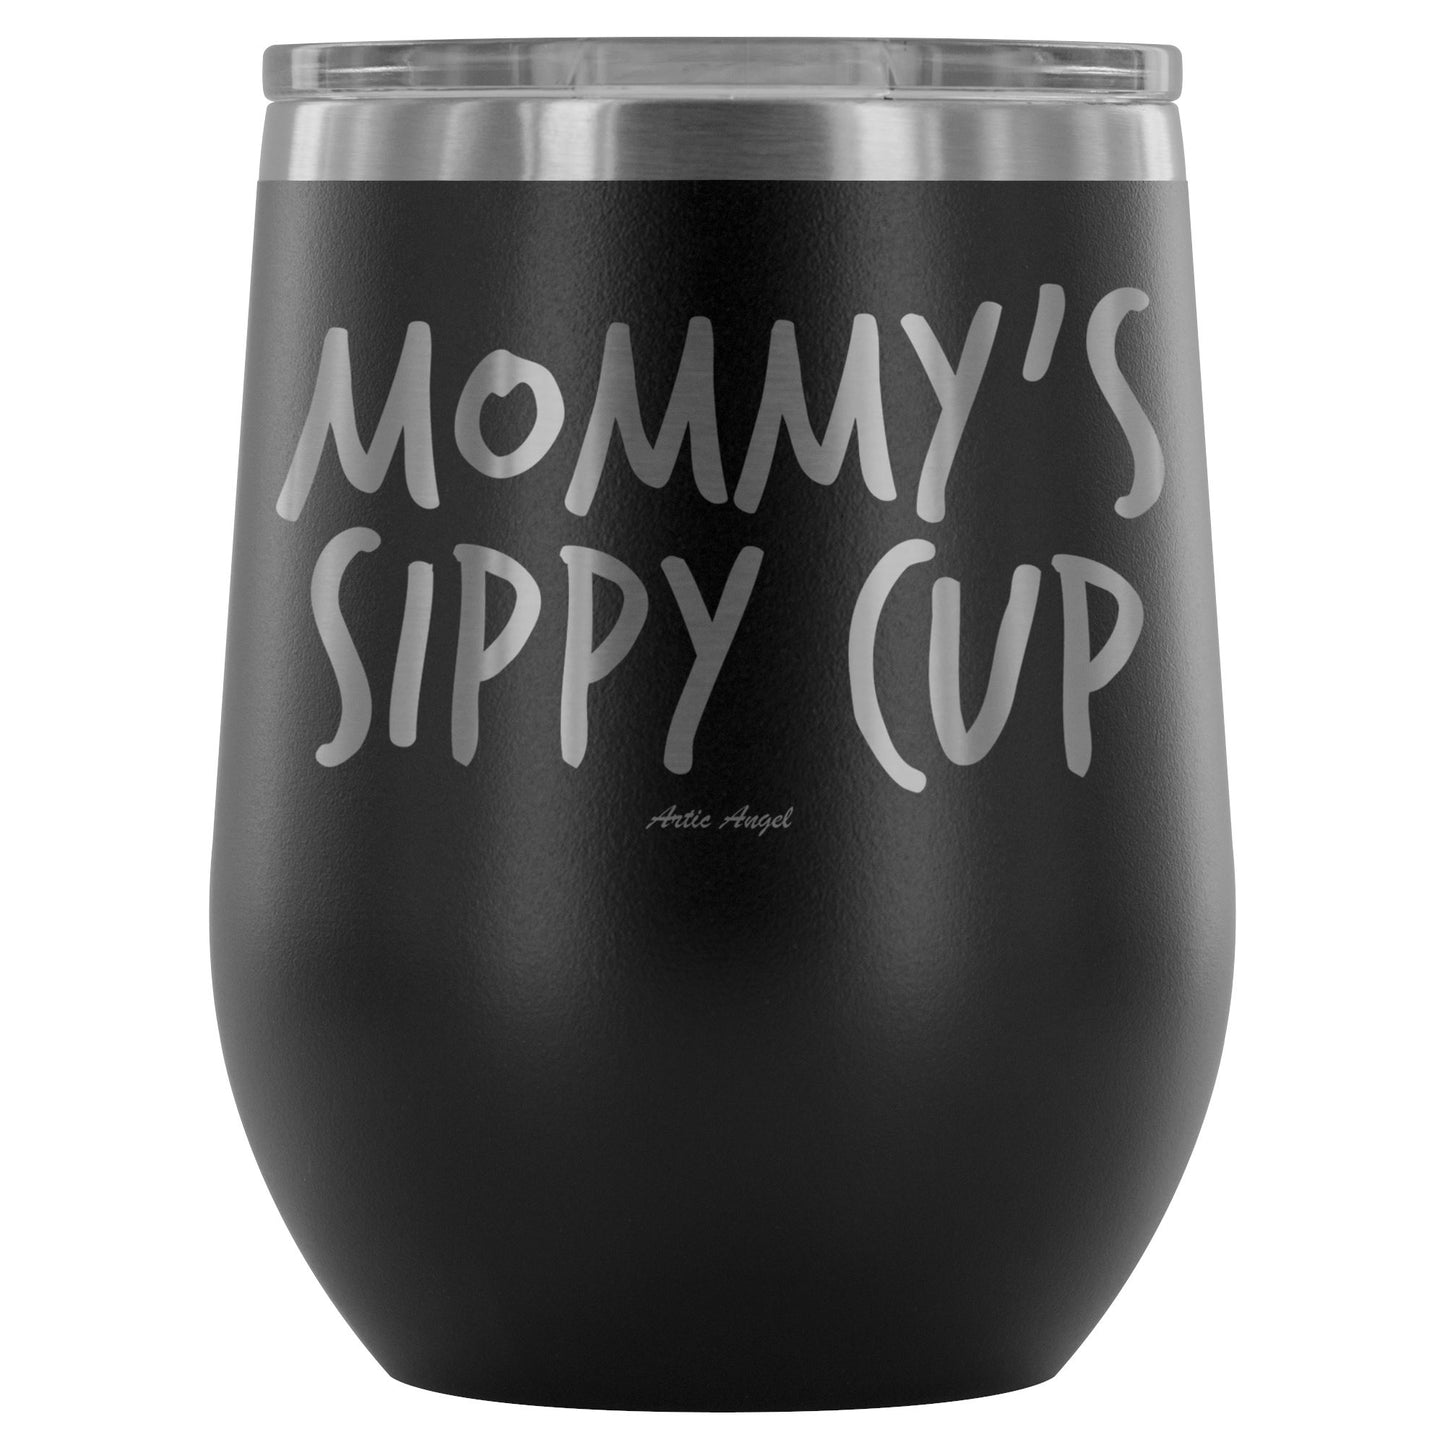 "Mommy's Sippy Cup" - Stemless Wine Cup Wine Tumbler Black 